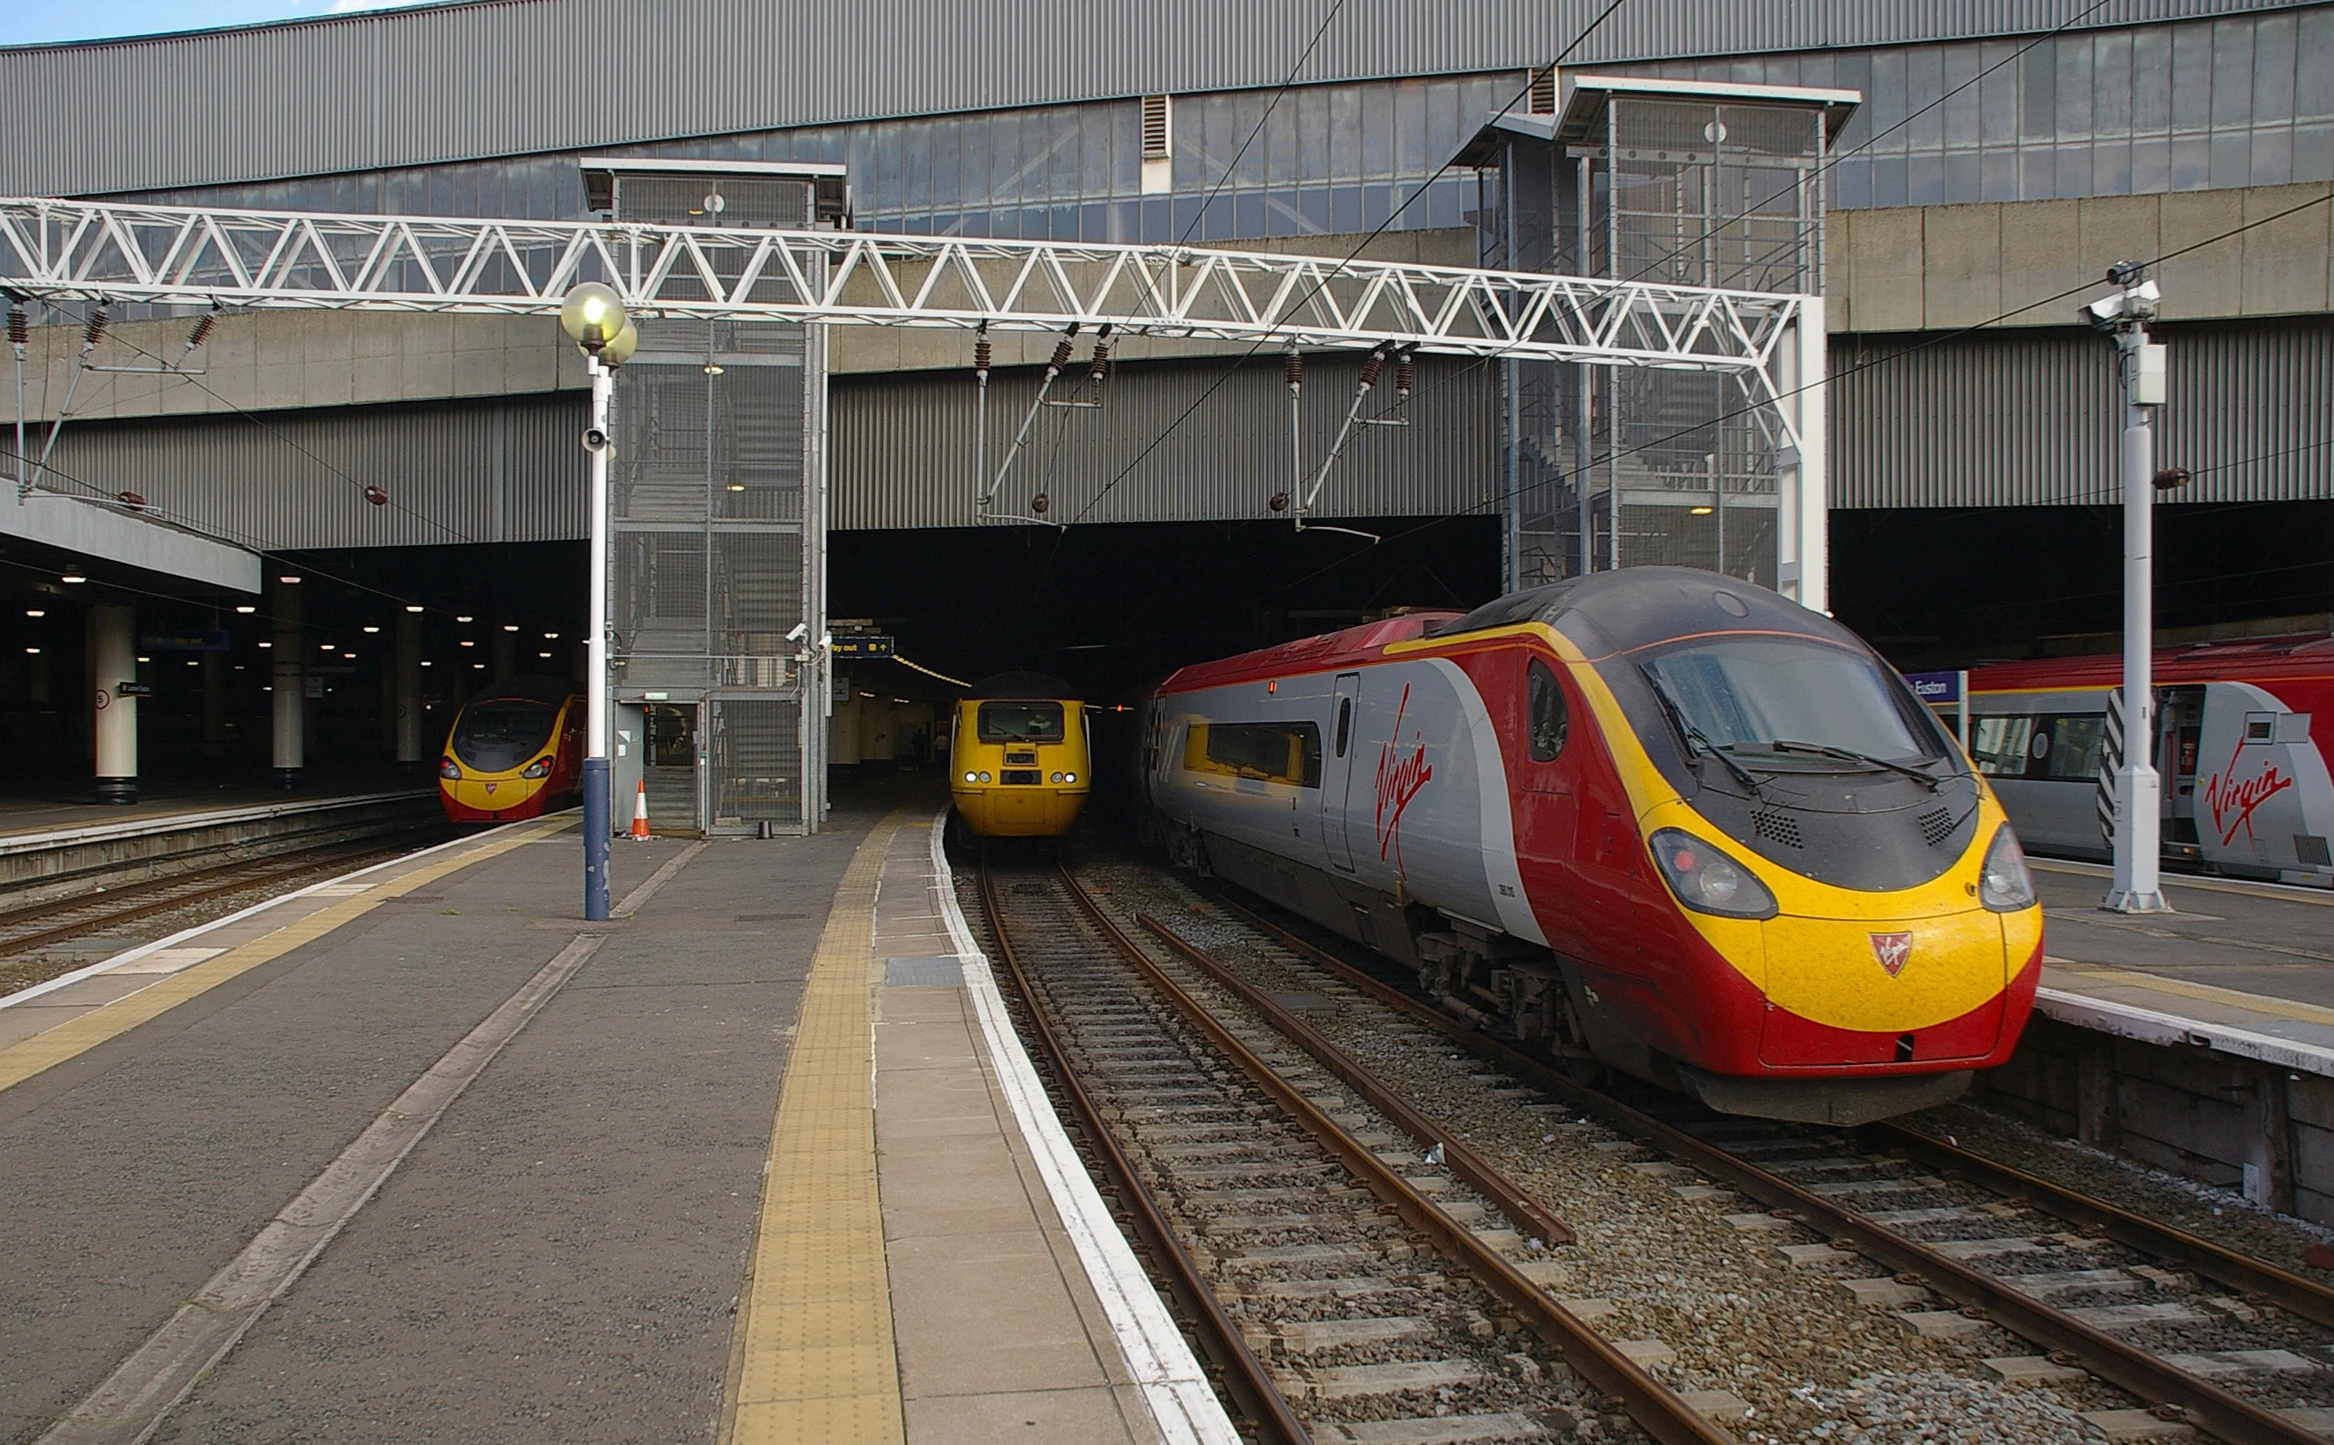 The Accelerating Innovation in Rail scheme is open to entries from any sized firm